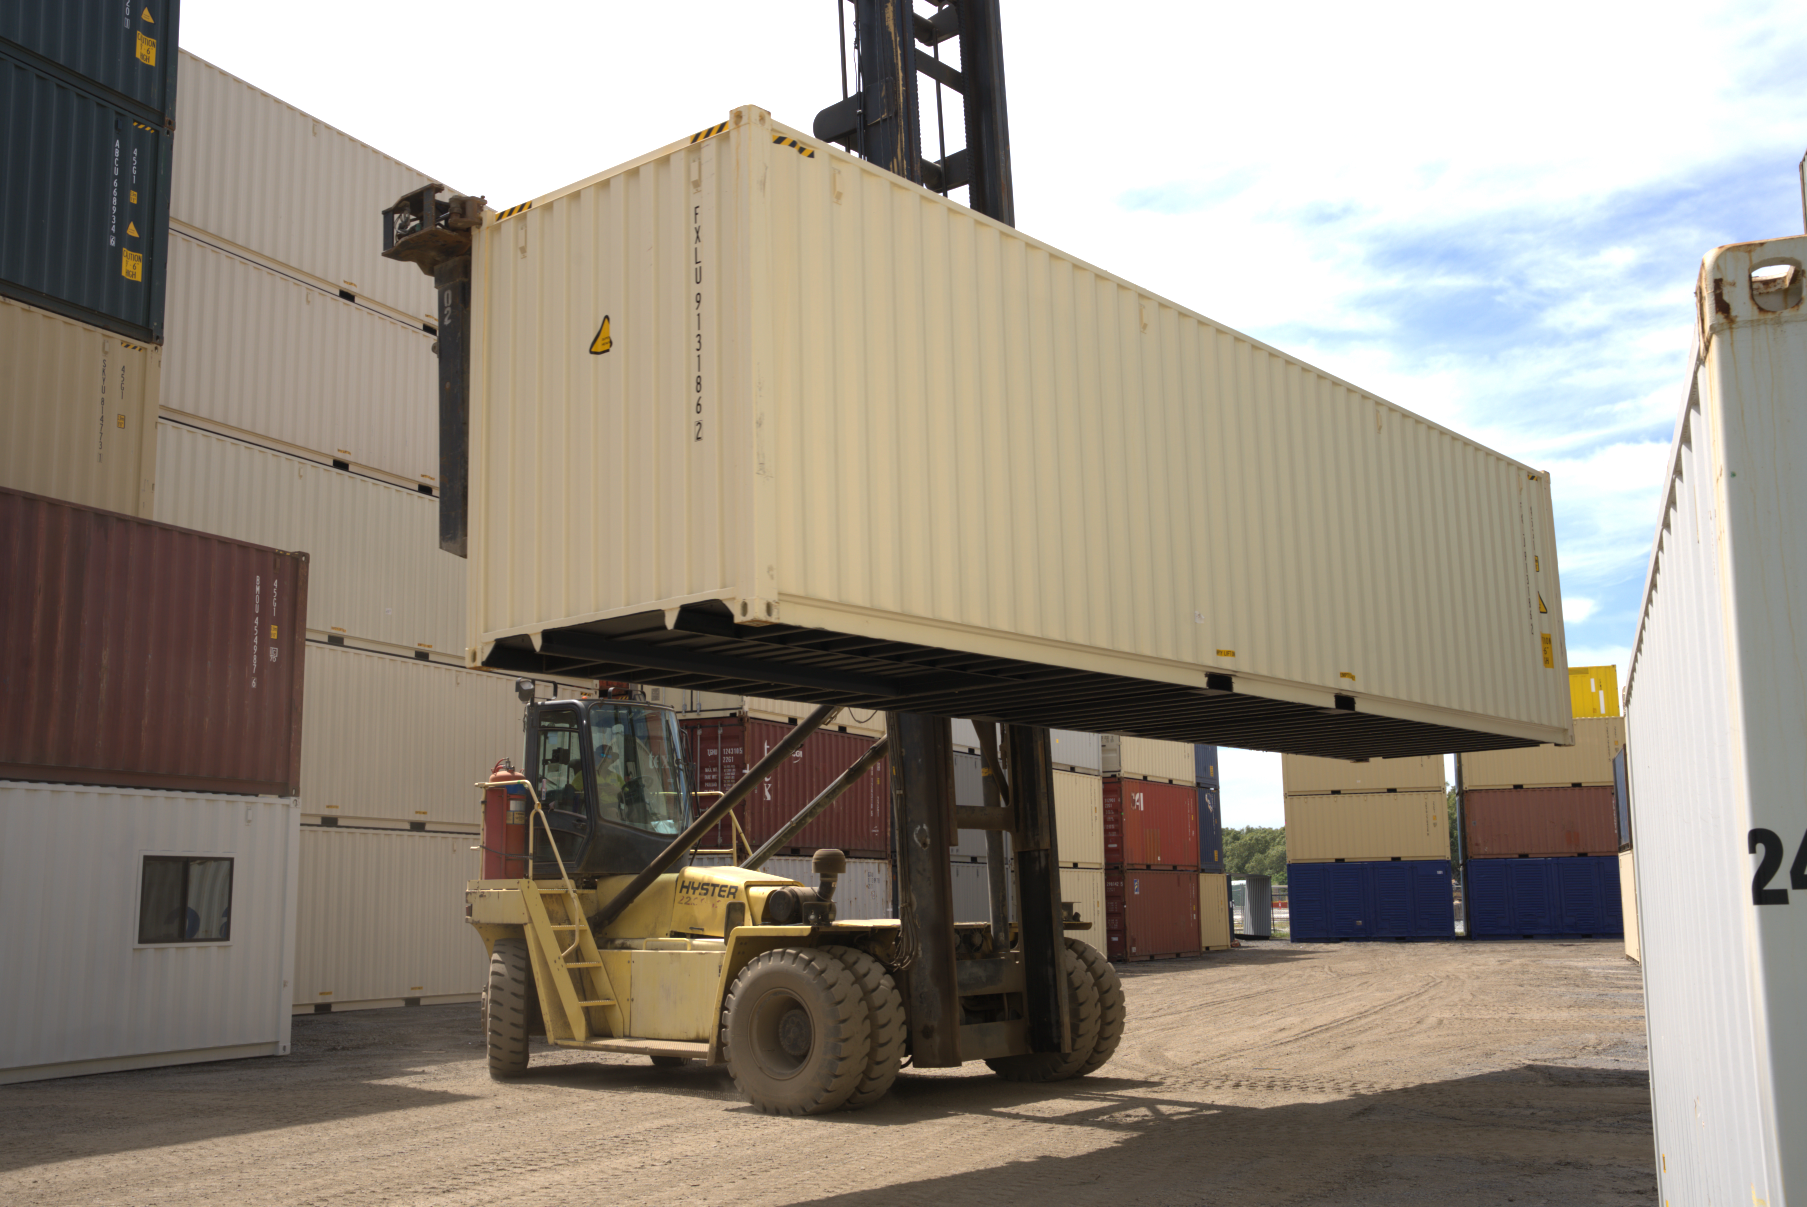 40ft shipping container lifted by a forklift